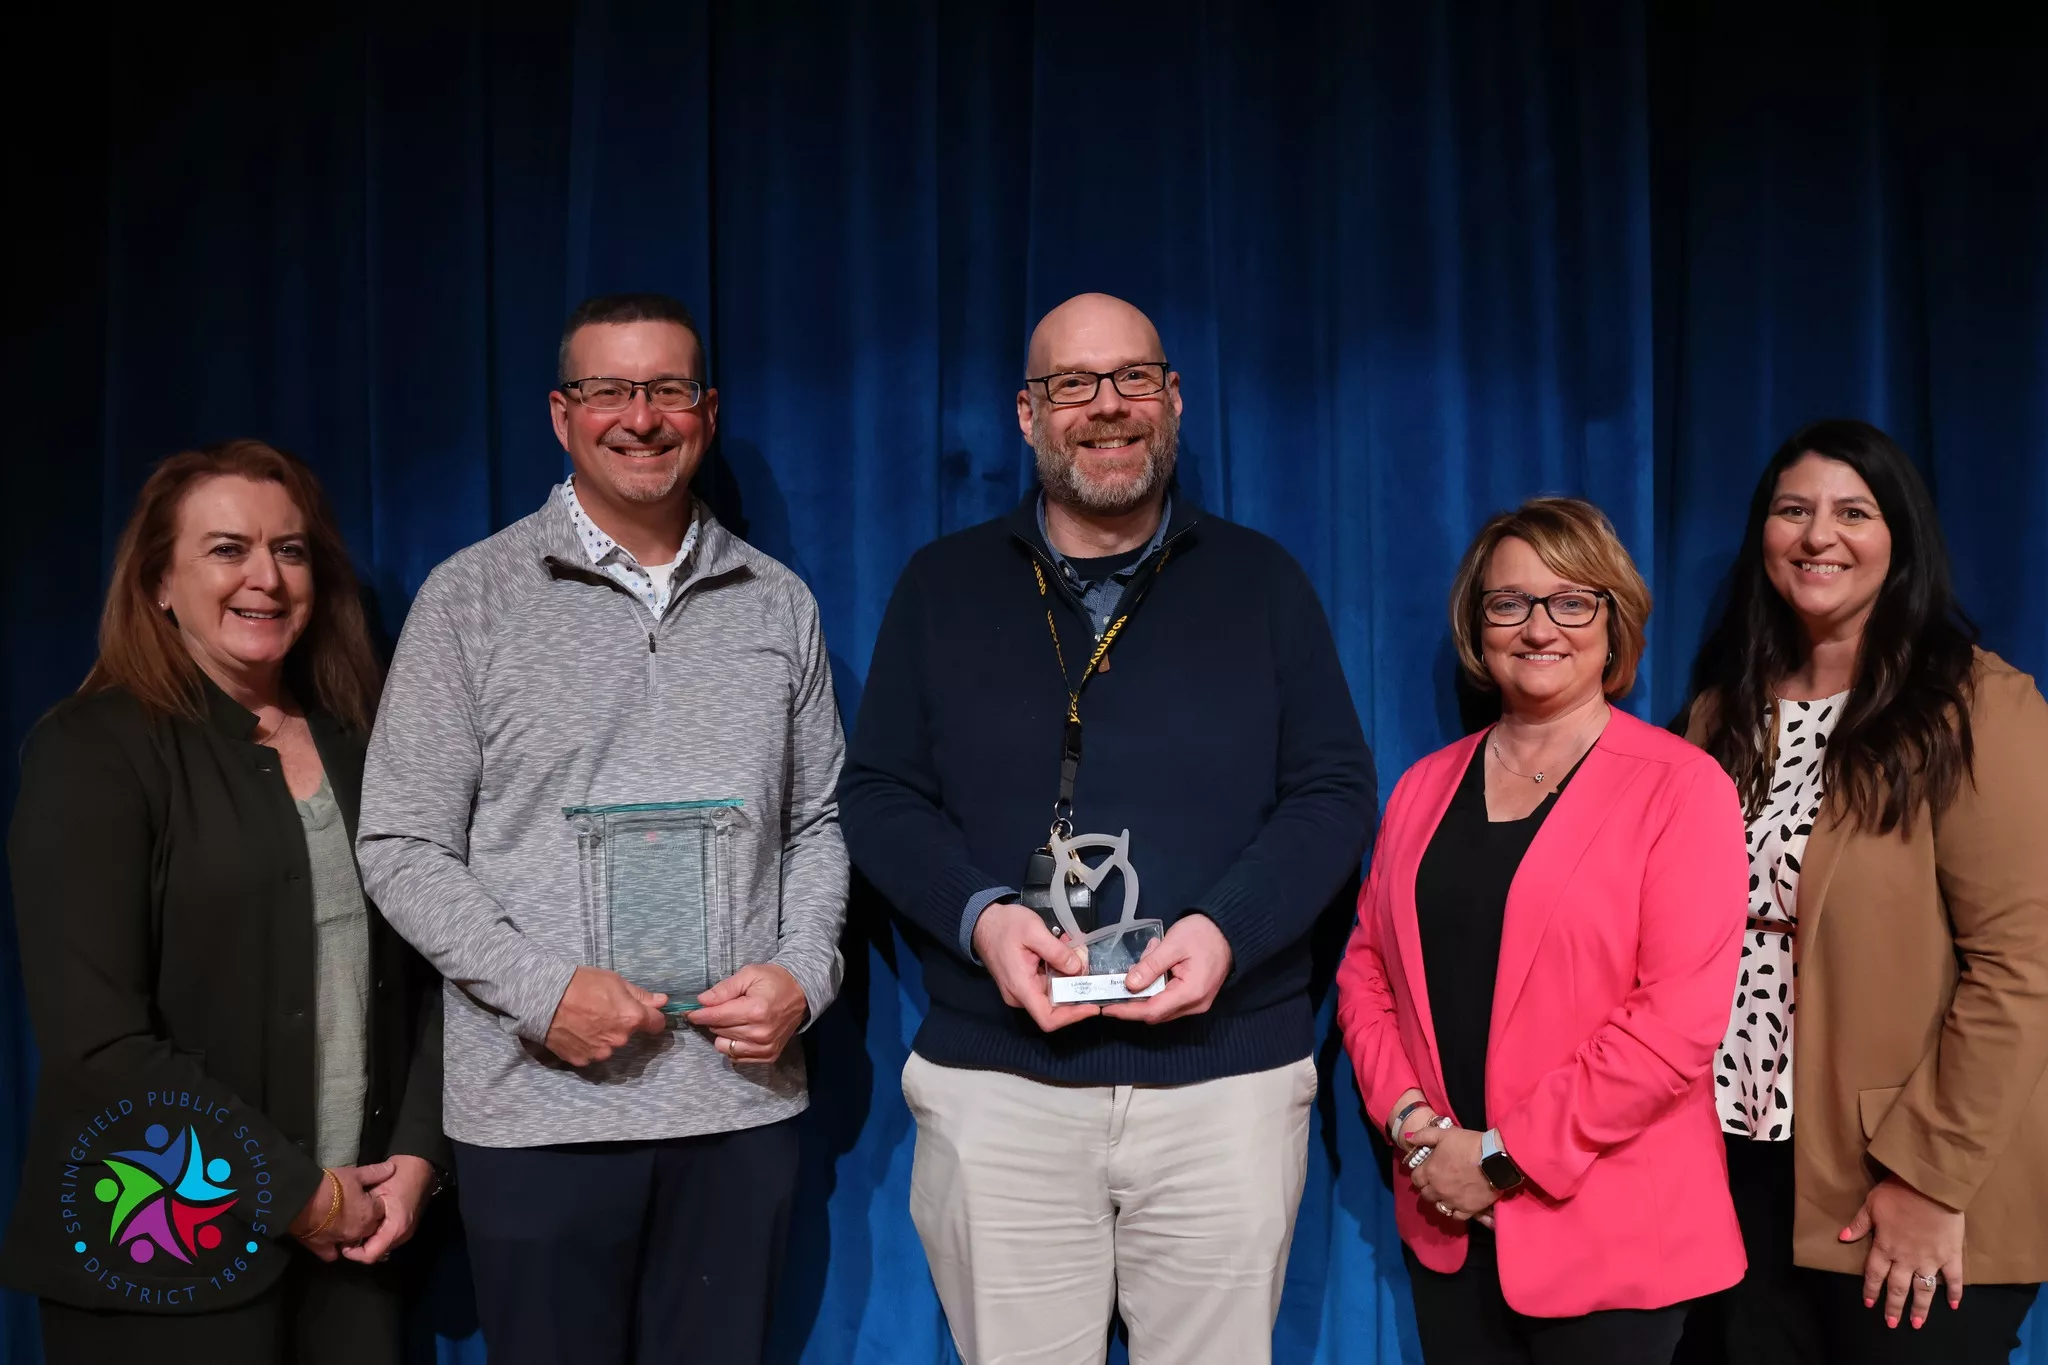 Jason Wind and Jason Potter (Left to right) receiving their Horace Mann awards for 2024 with Superintendent Jennifer Gill, Horace Mann CEO Marita Zuraitis, and Katie Hageman (Credit: District 186 Facebook)